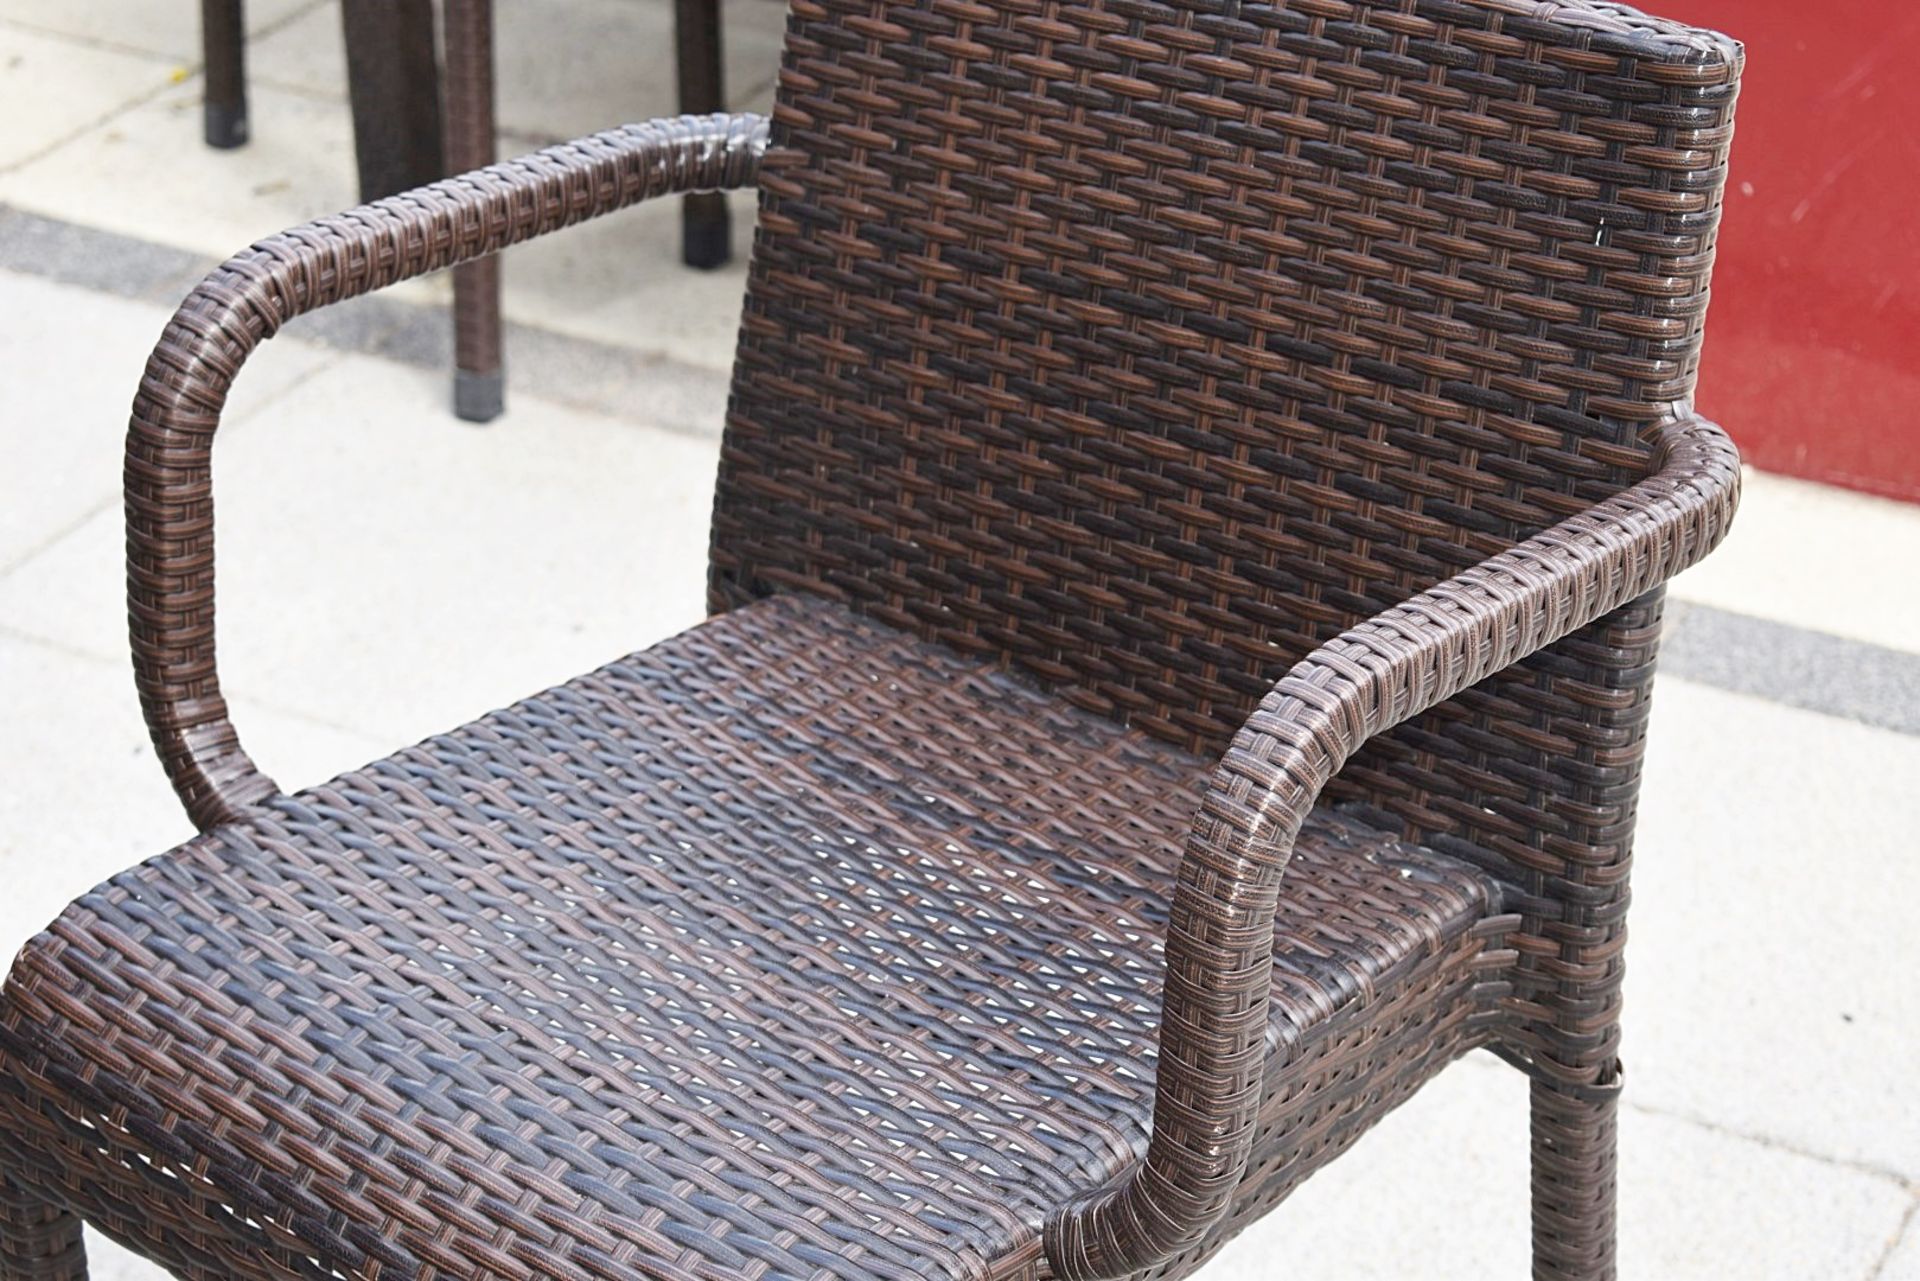 4 x Outdoor Rattan Garden Chairs With A Matching Square Table - Image 4 of 5